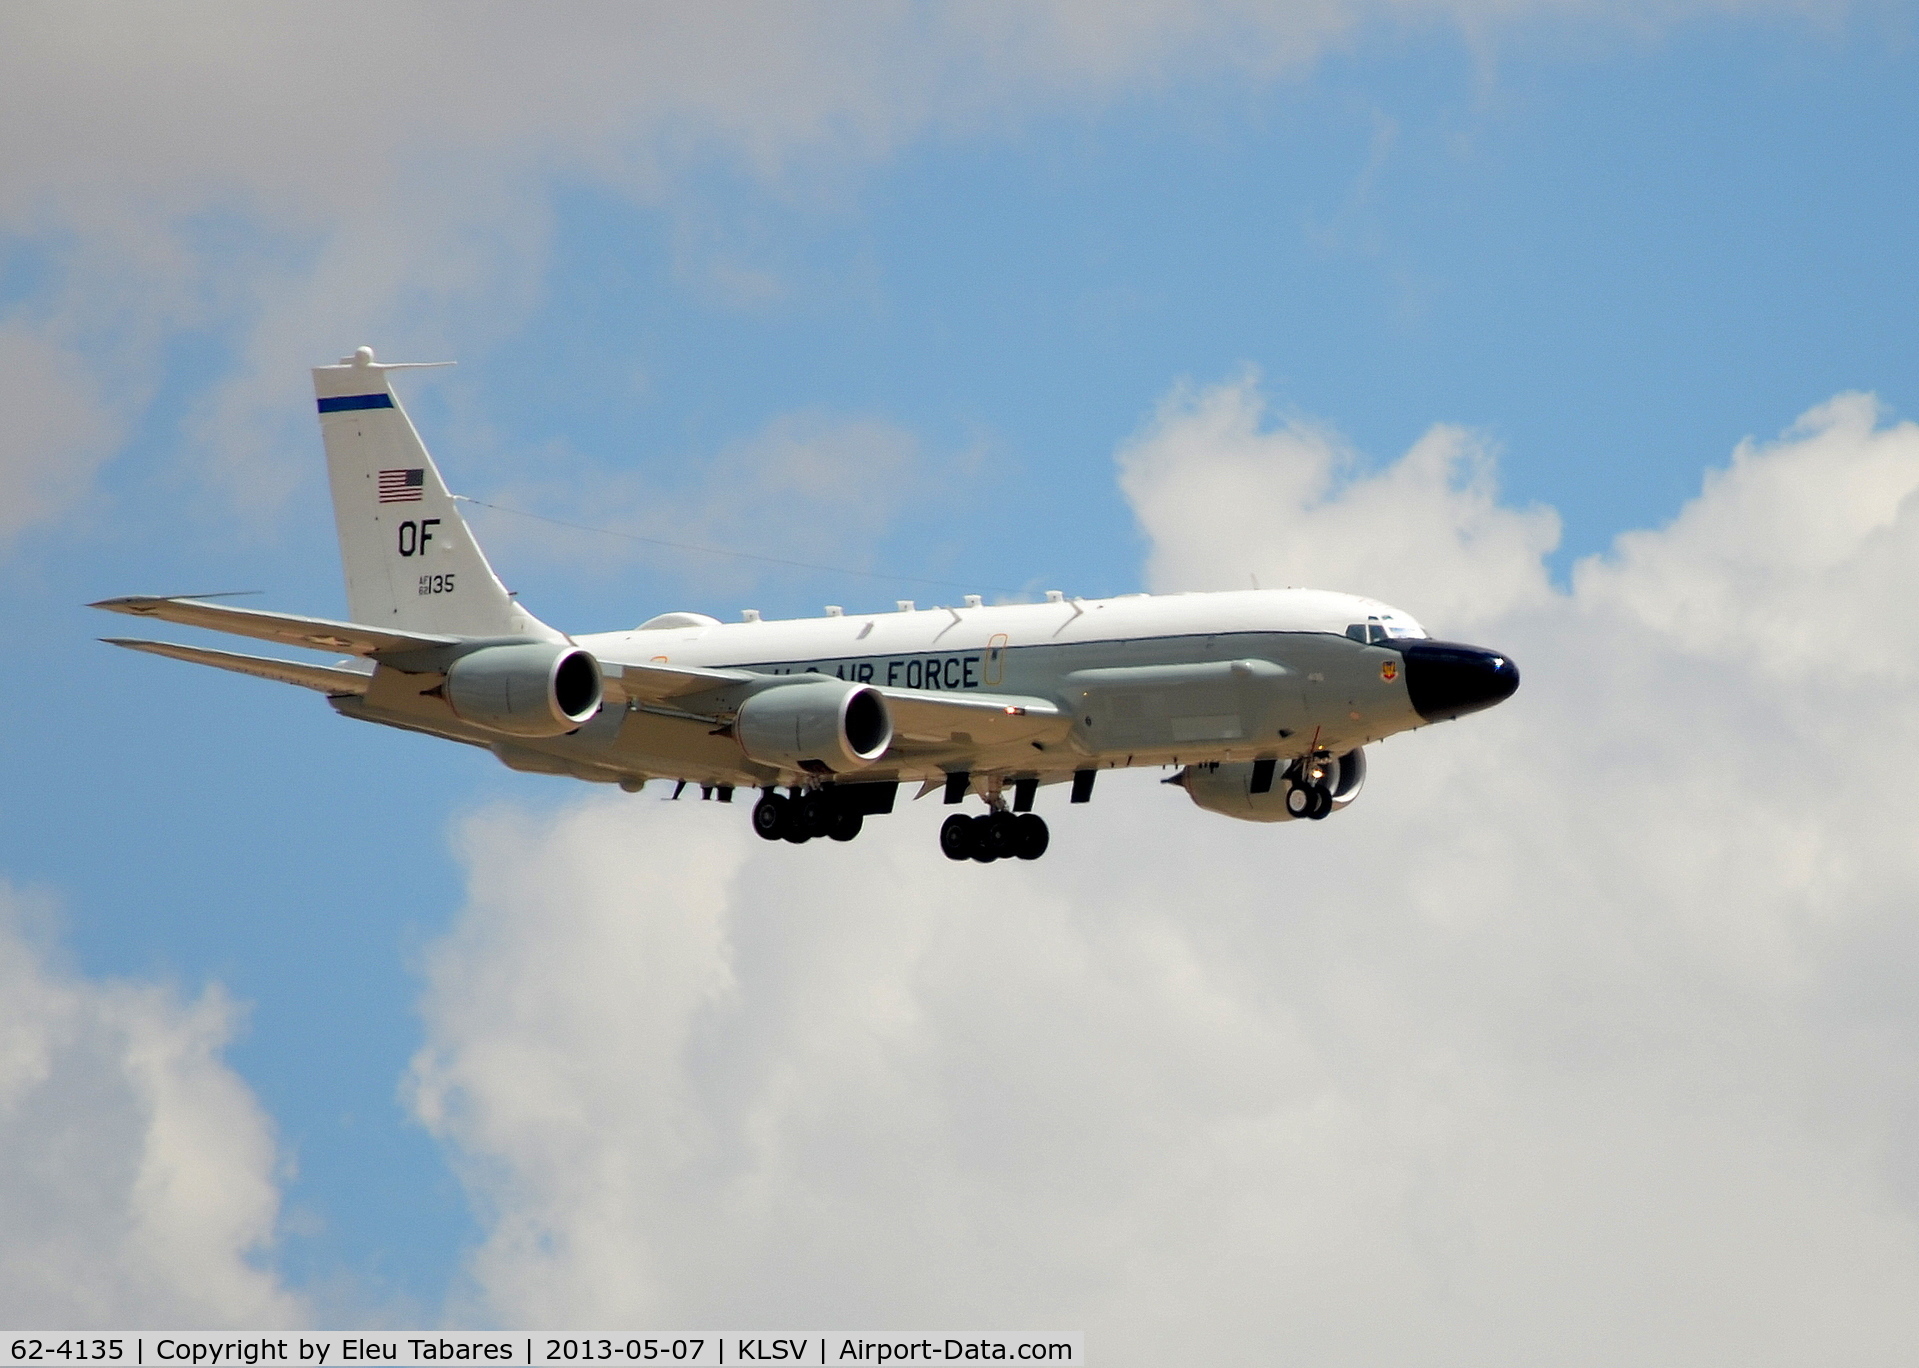 62-4135, 1962 Boeing RC-135W Rivet Joint C/N 18475, Taken on final approach to Nellis Air Force Base, Nevada.